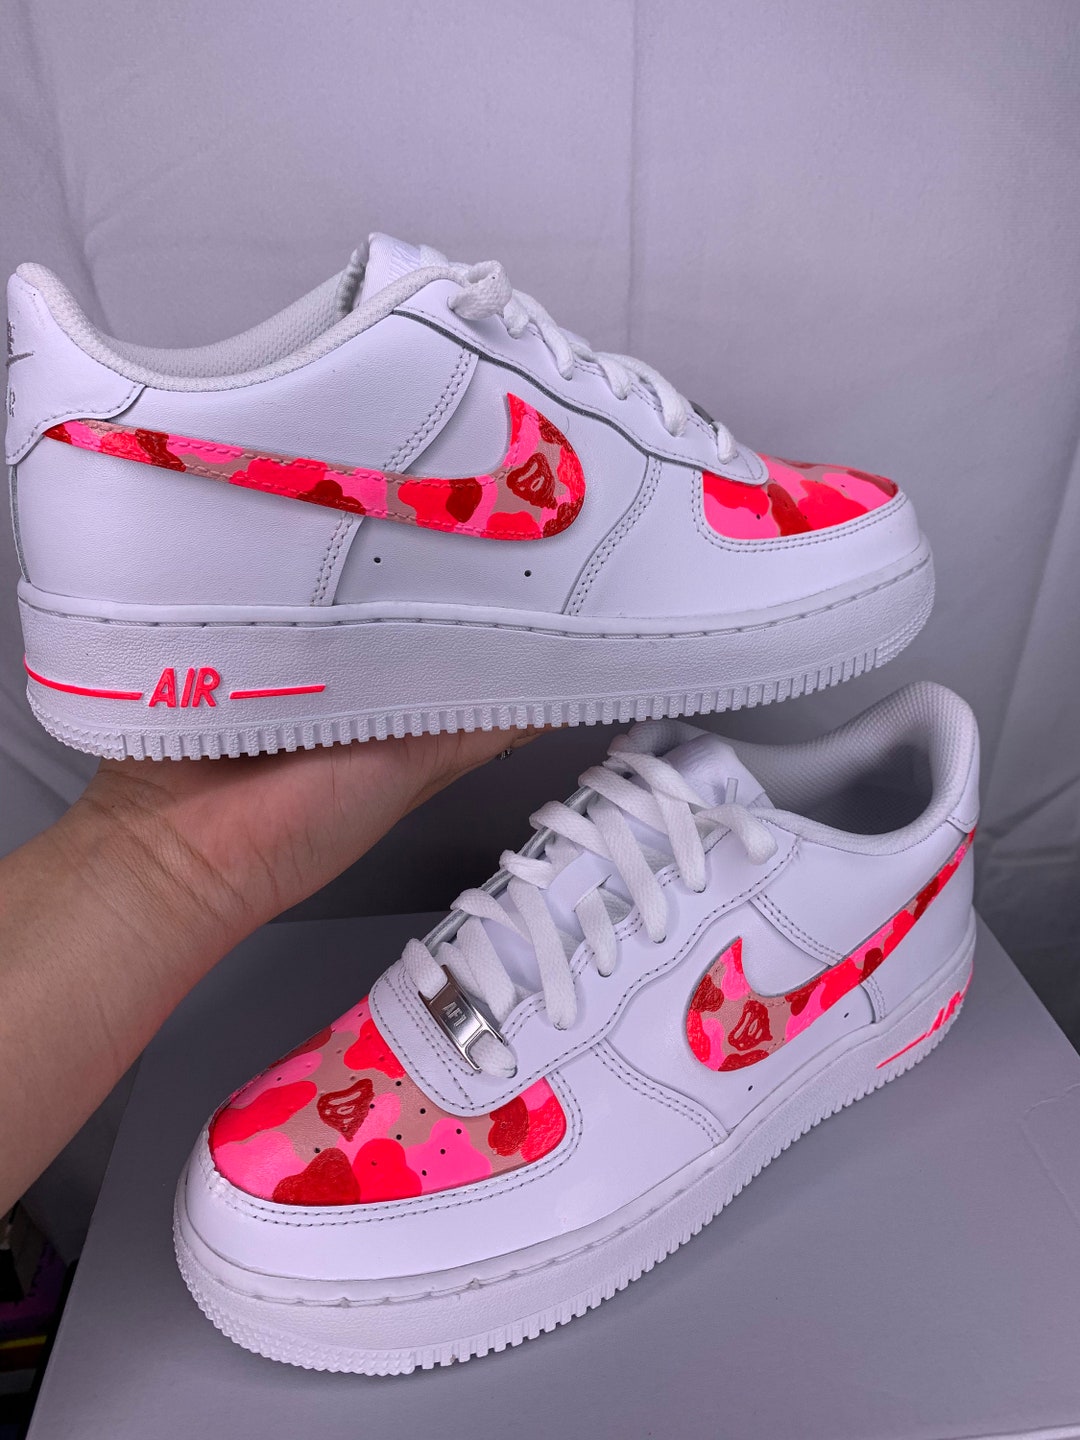 Neon Pink Air Force 1s MADE TO ORDER - Etsy